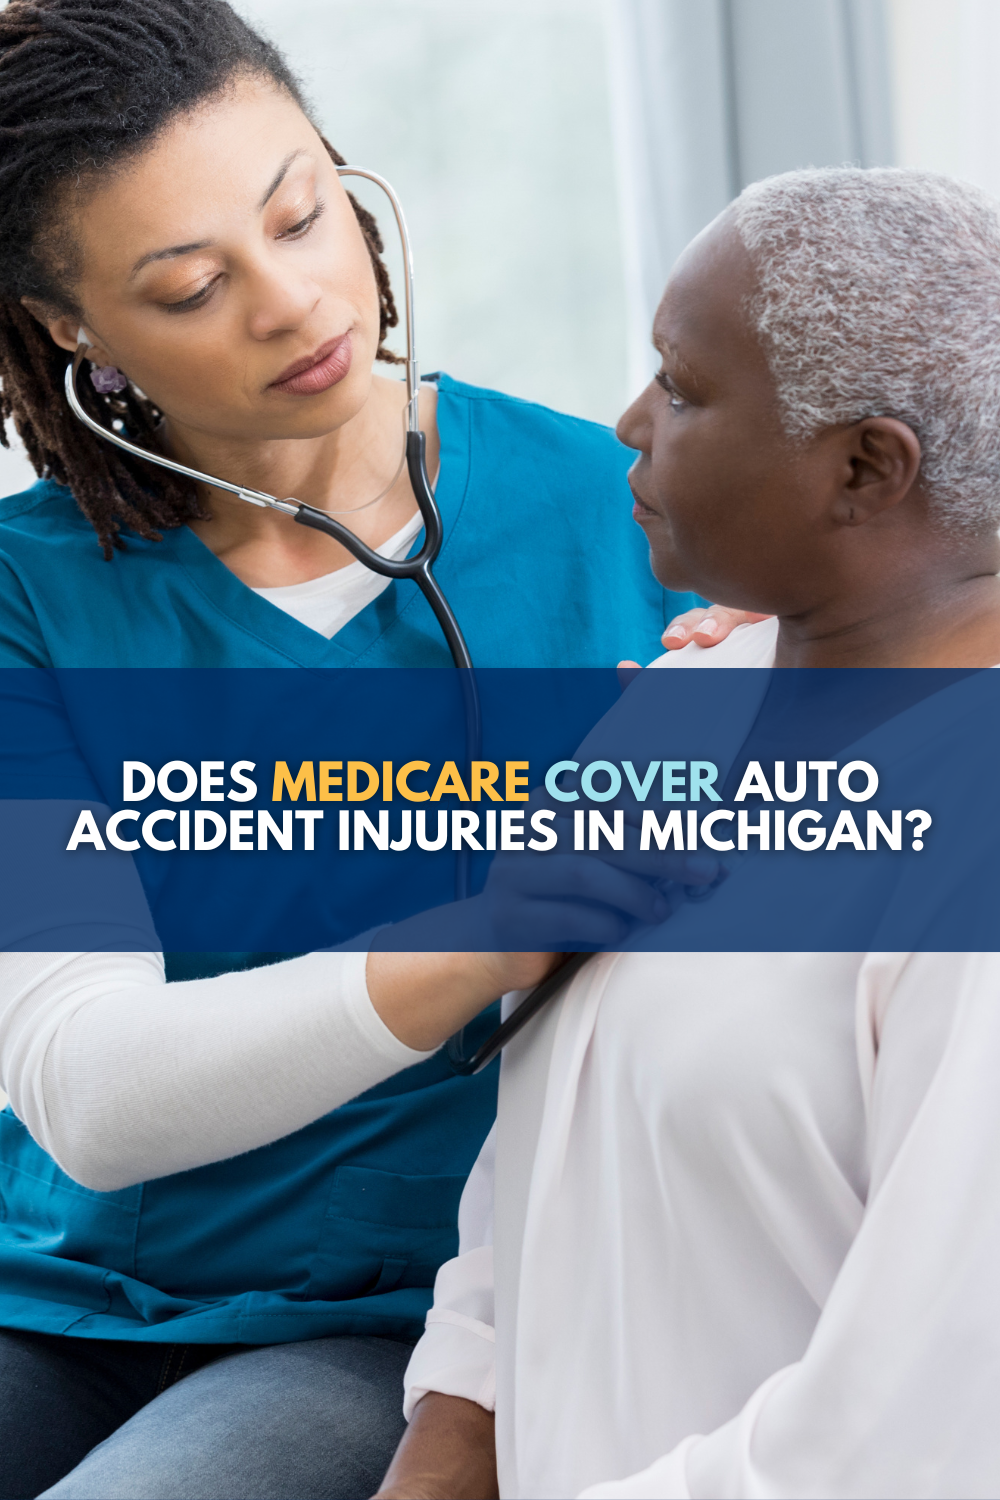 Does Medicare Cover Auto Accident Injuries?